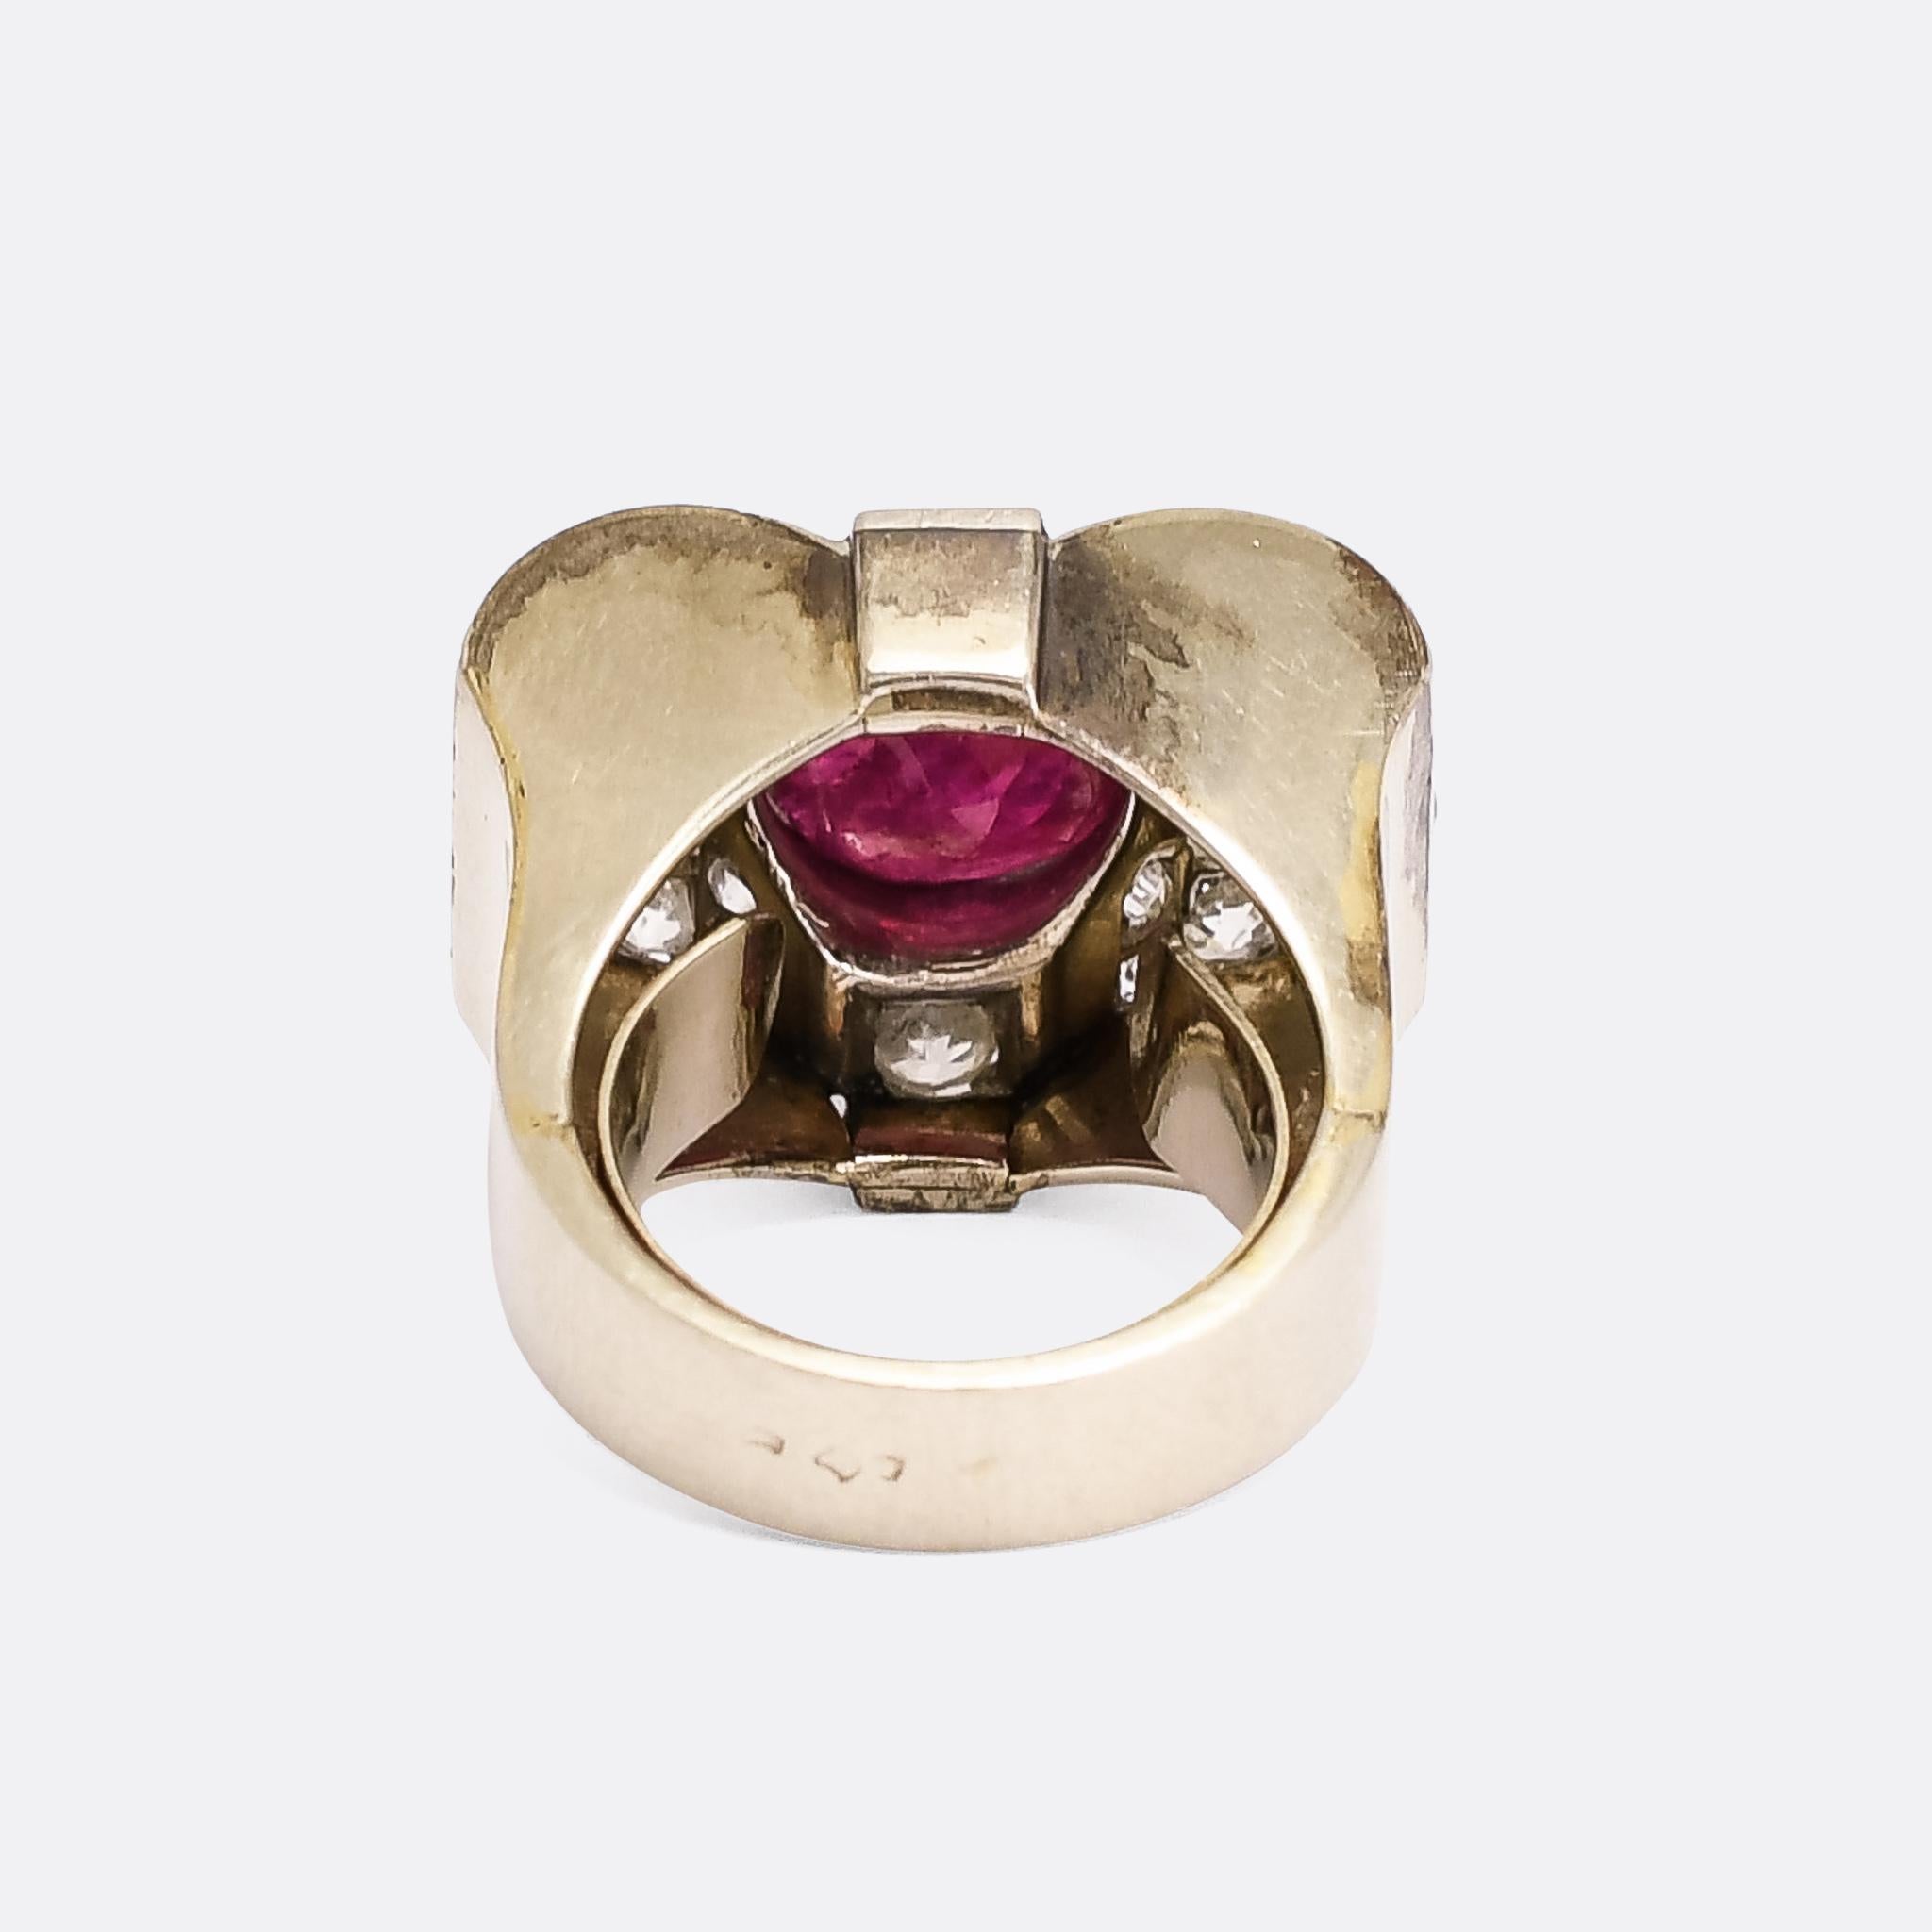 Modernist Vintage Mid-Century 4.77ct Burma Ruby Cocktail Ring For Sale